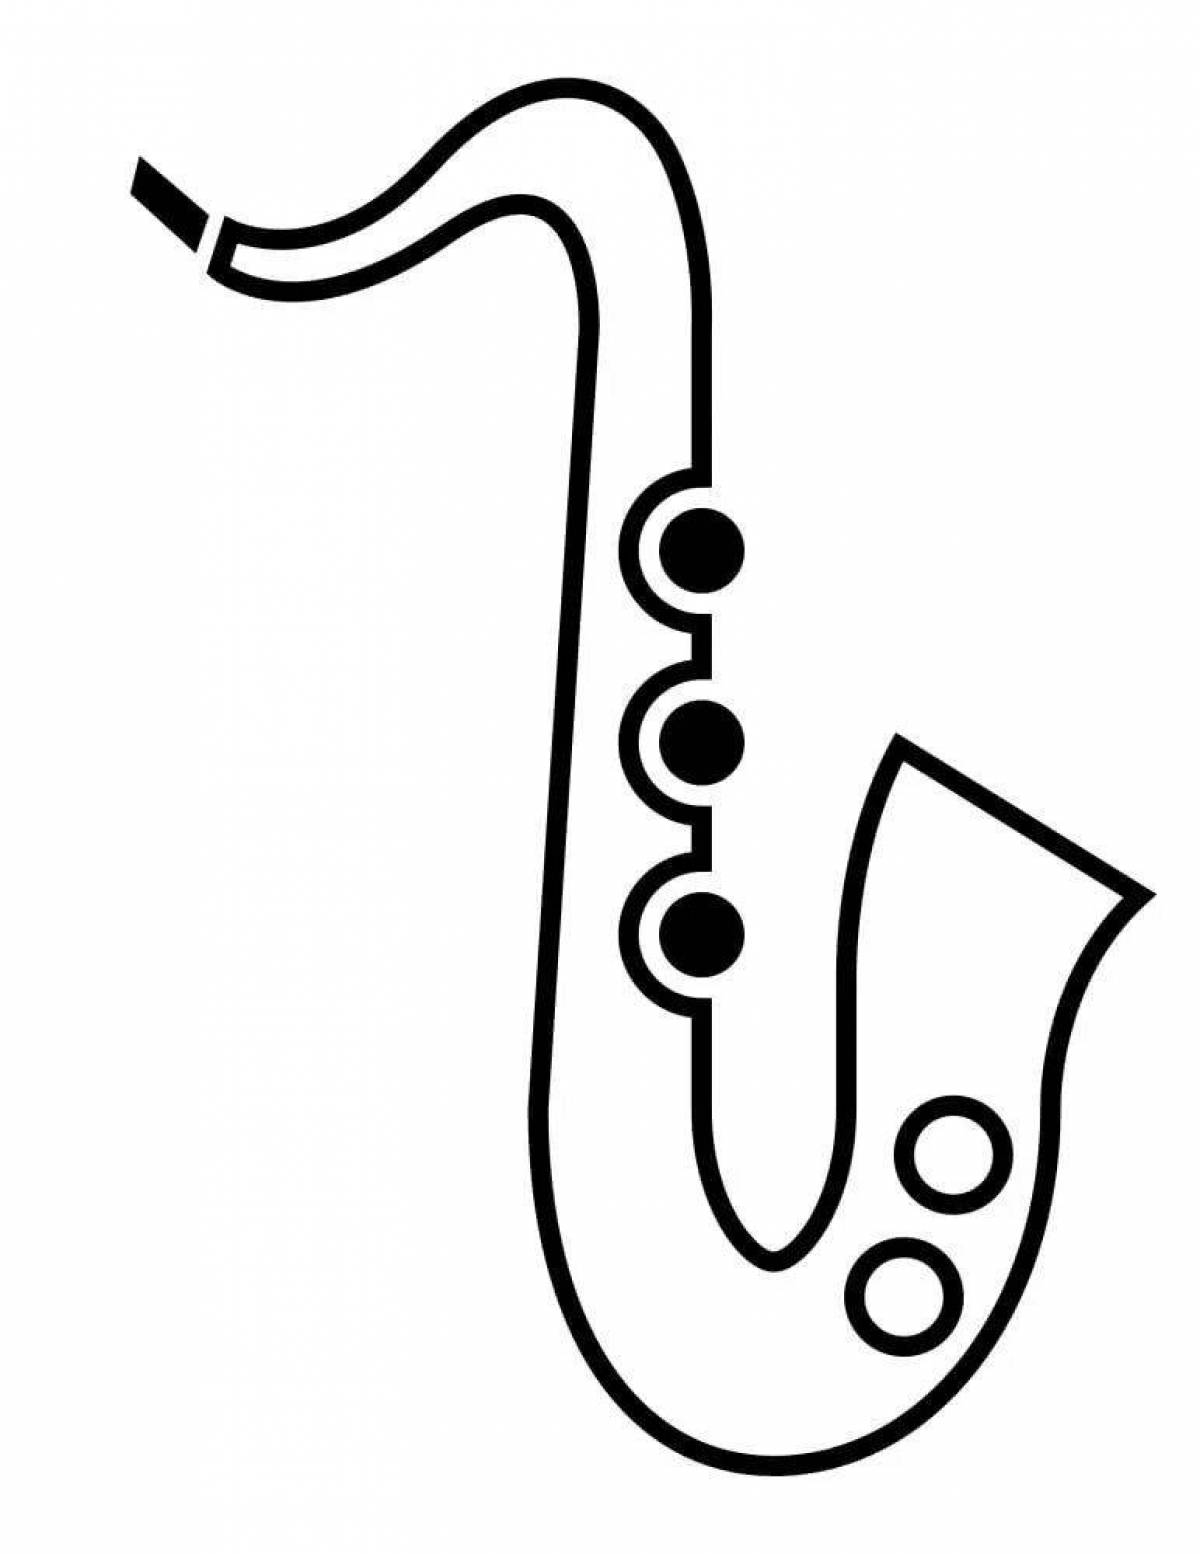 Charming saxophone coloring page